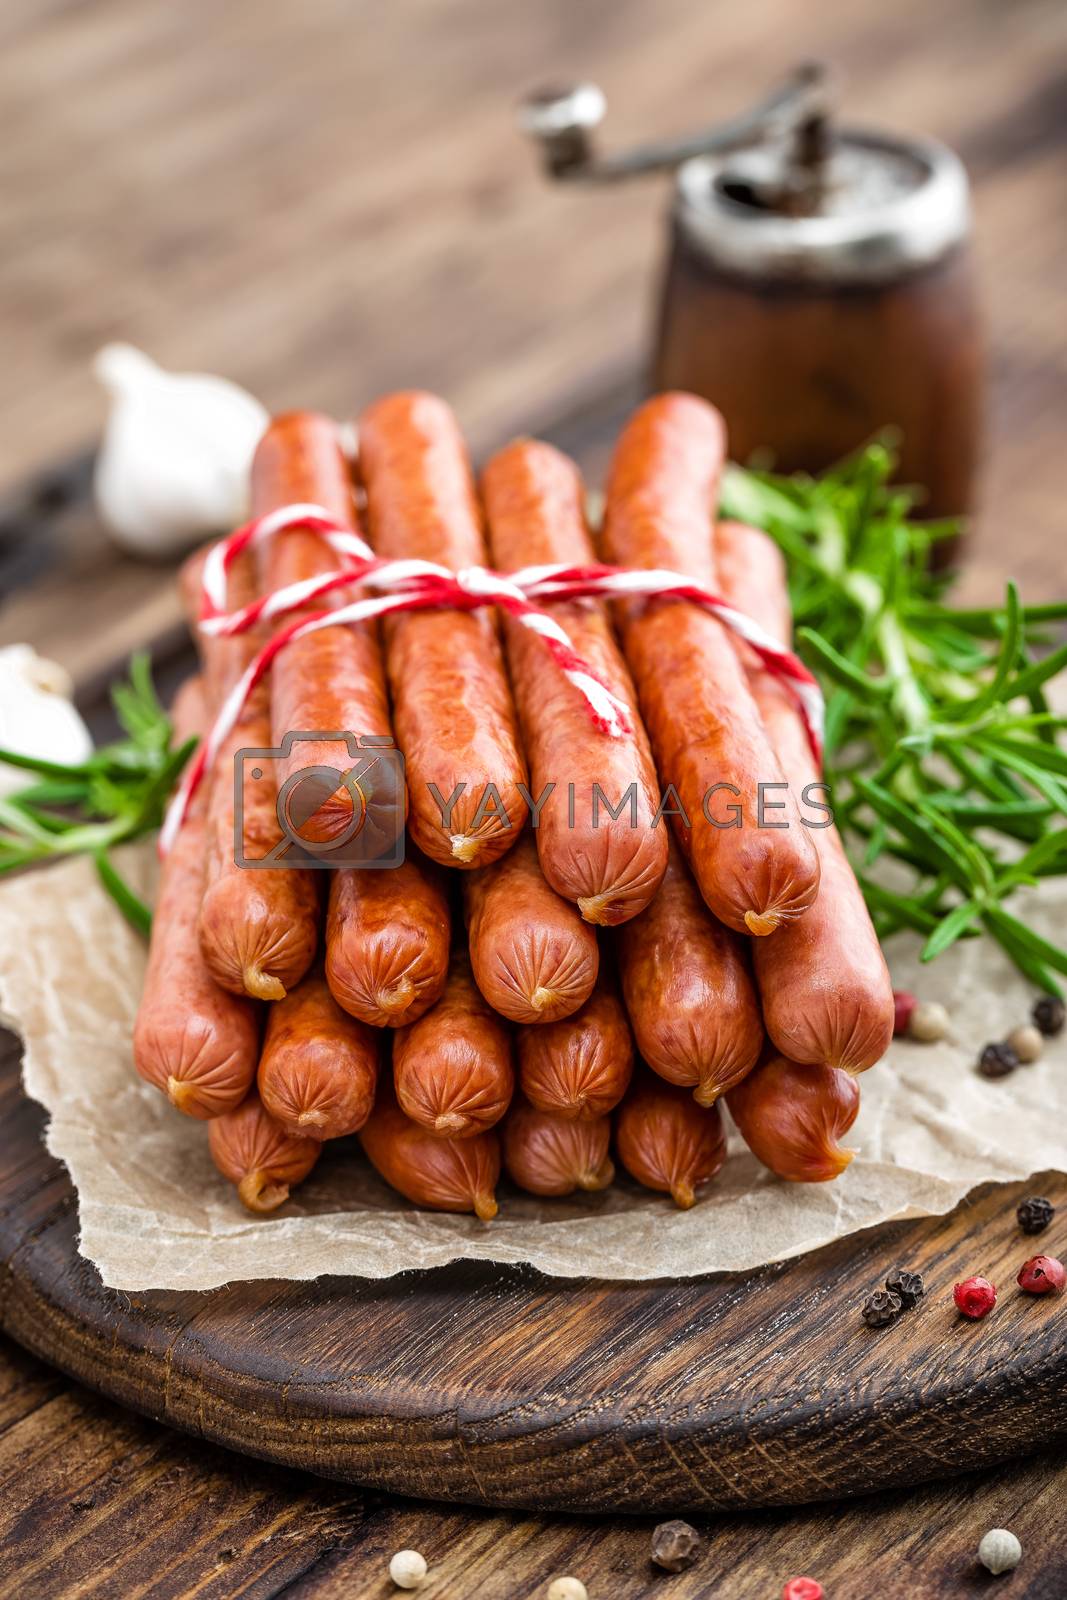 Royalty free image of Sausages on wooden background by yelenayemchuk